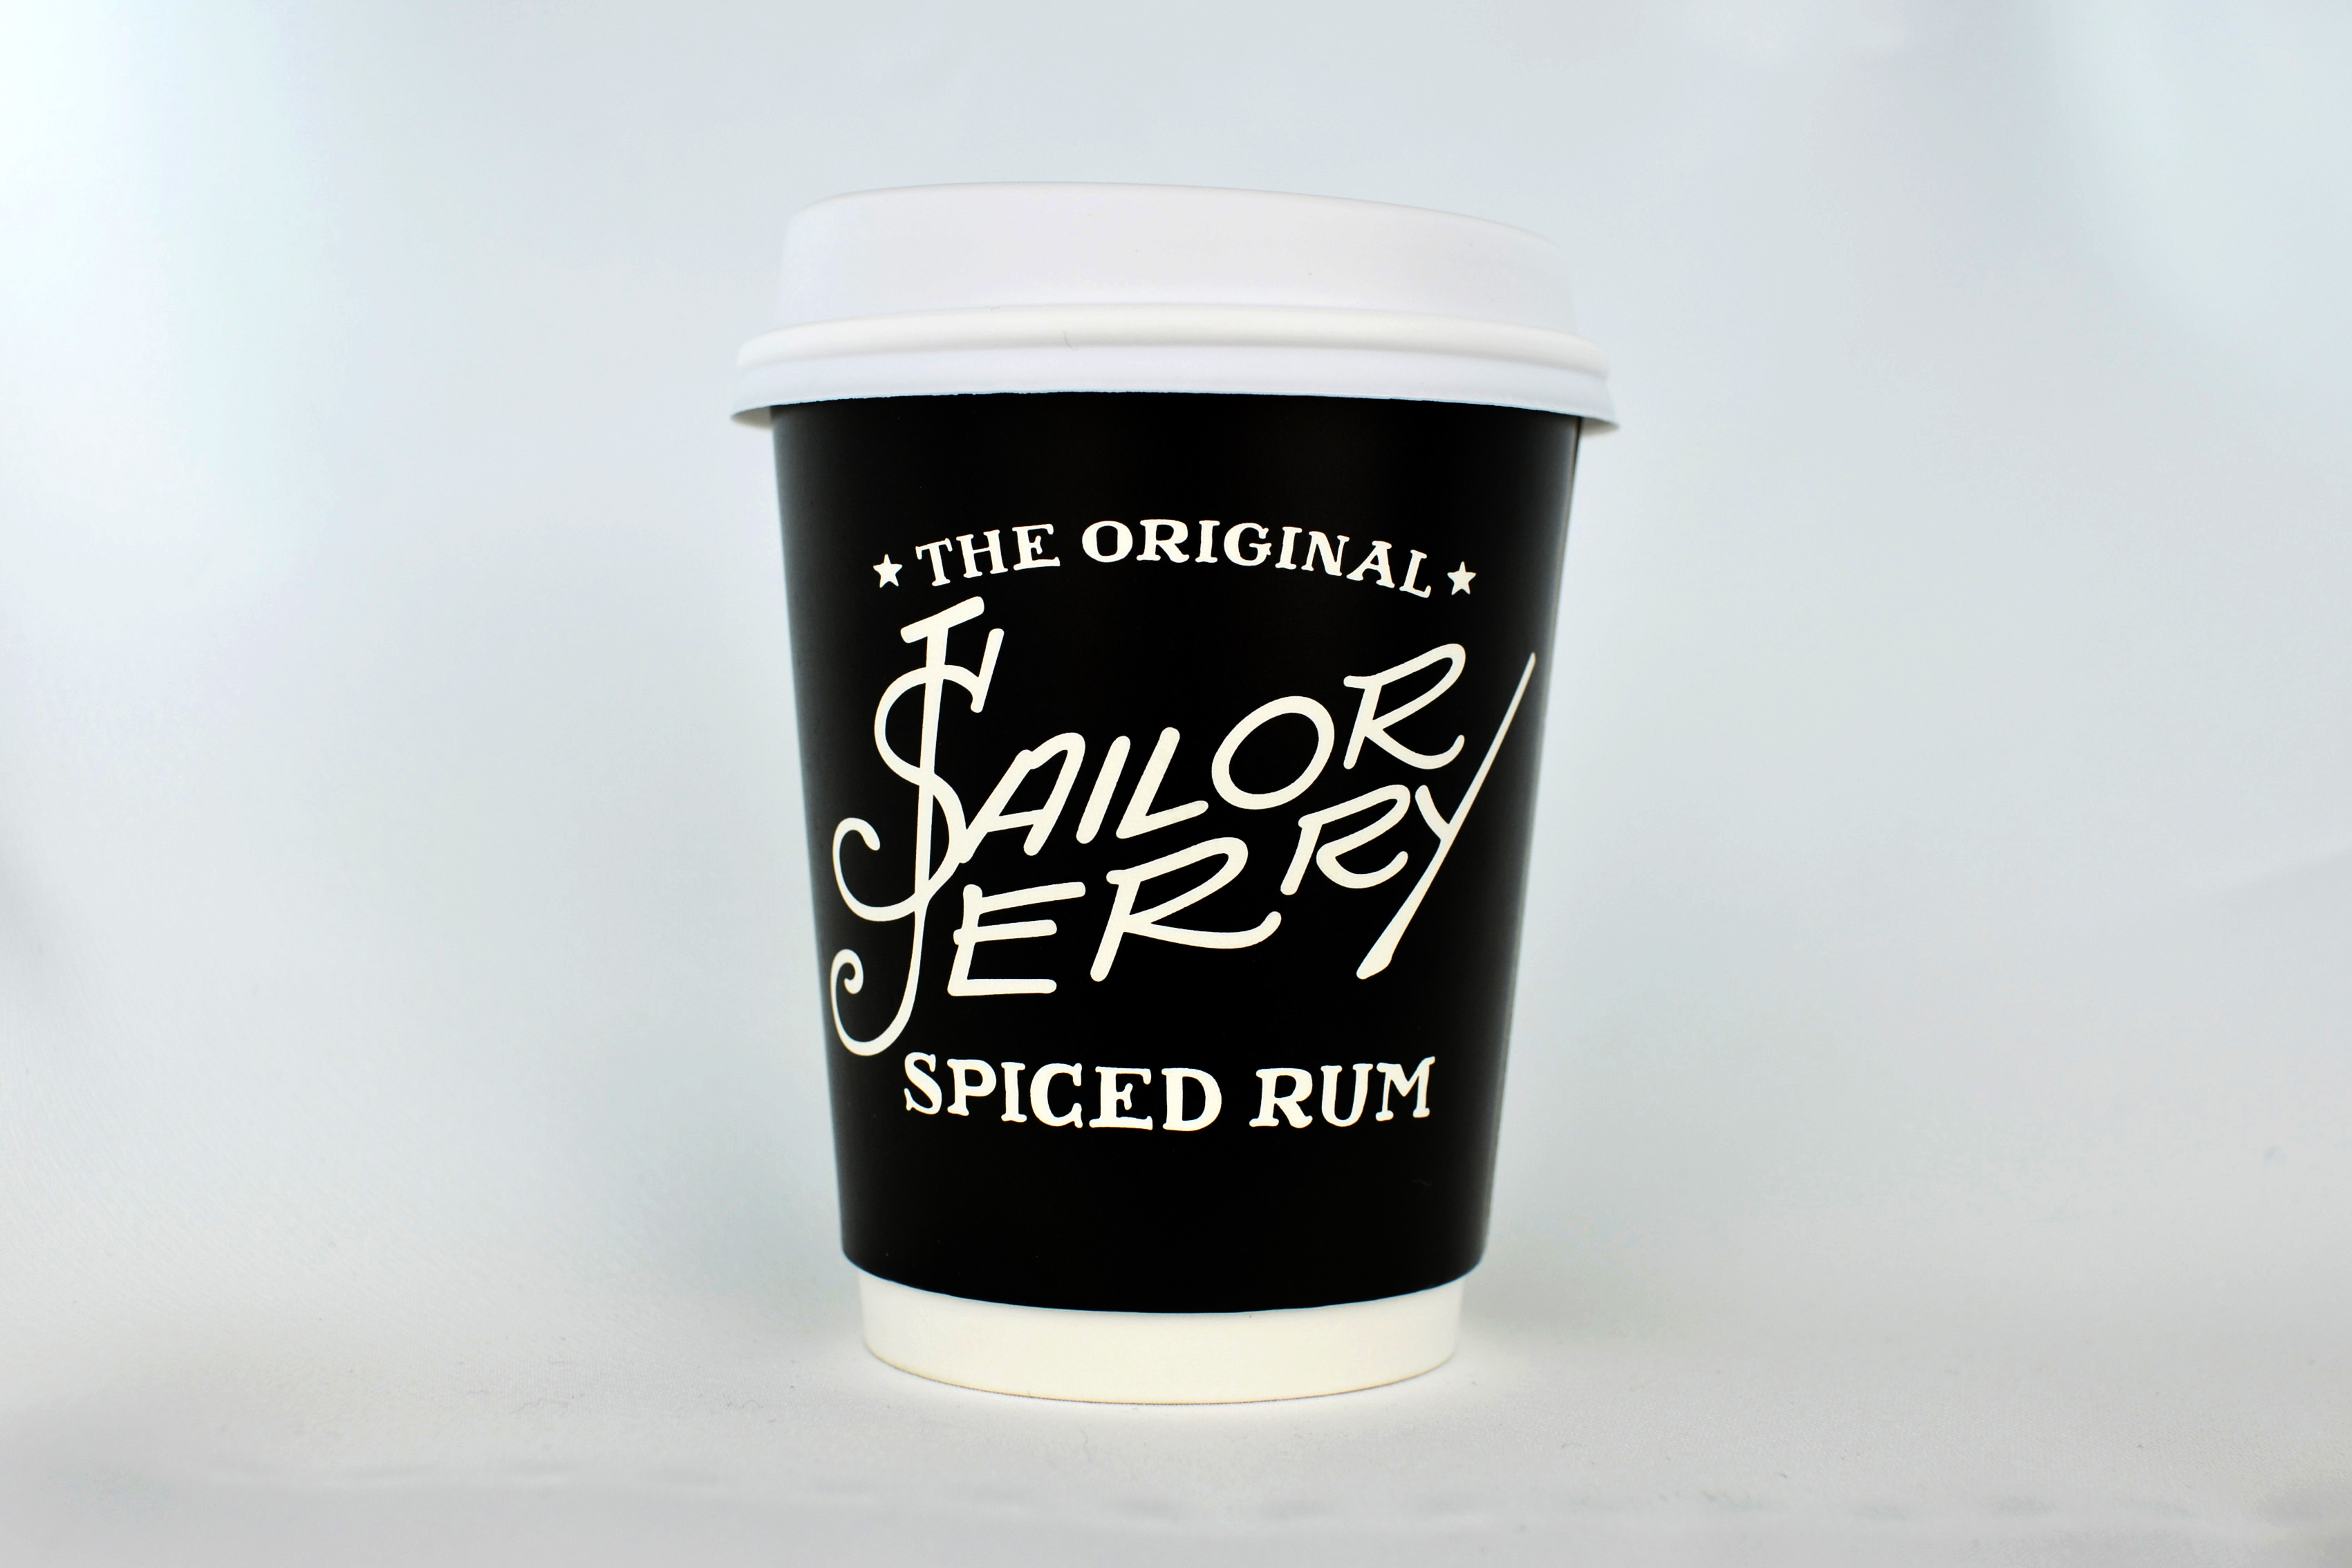 coffee cup advertising sailor jerry campaign cup front view